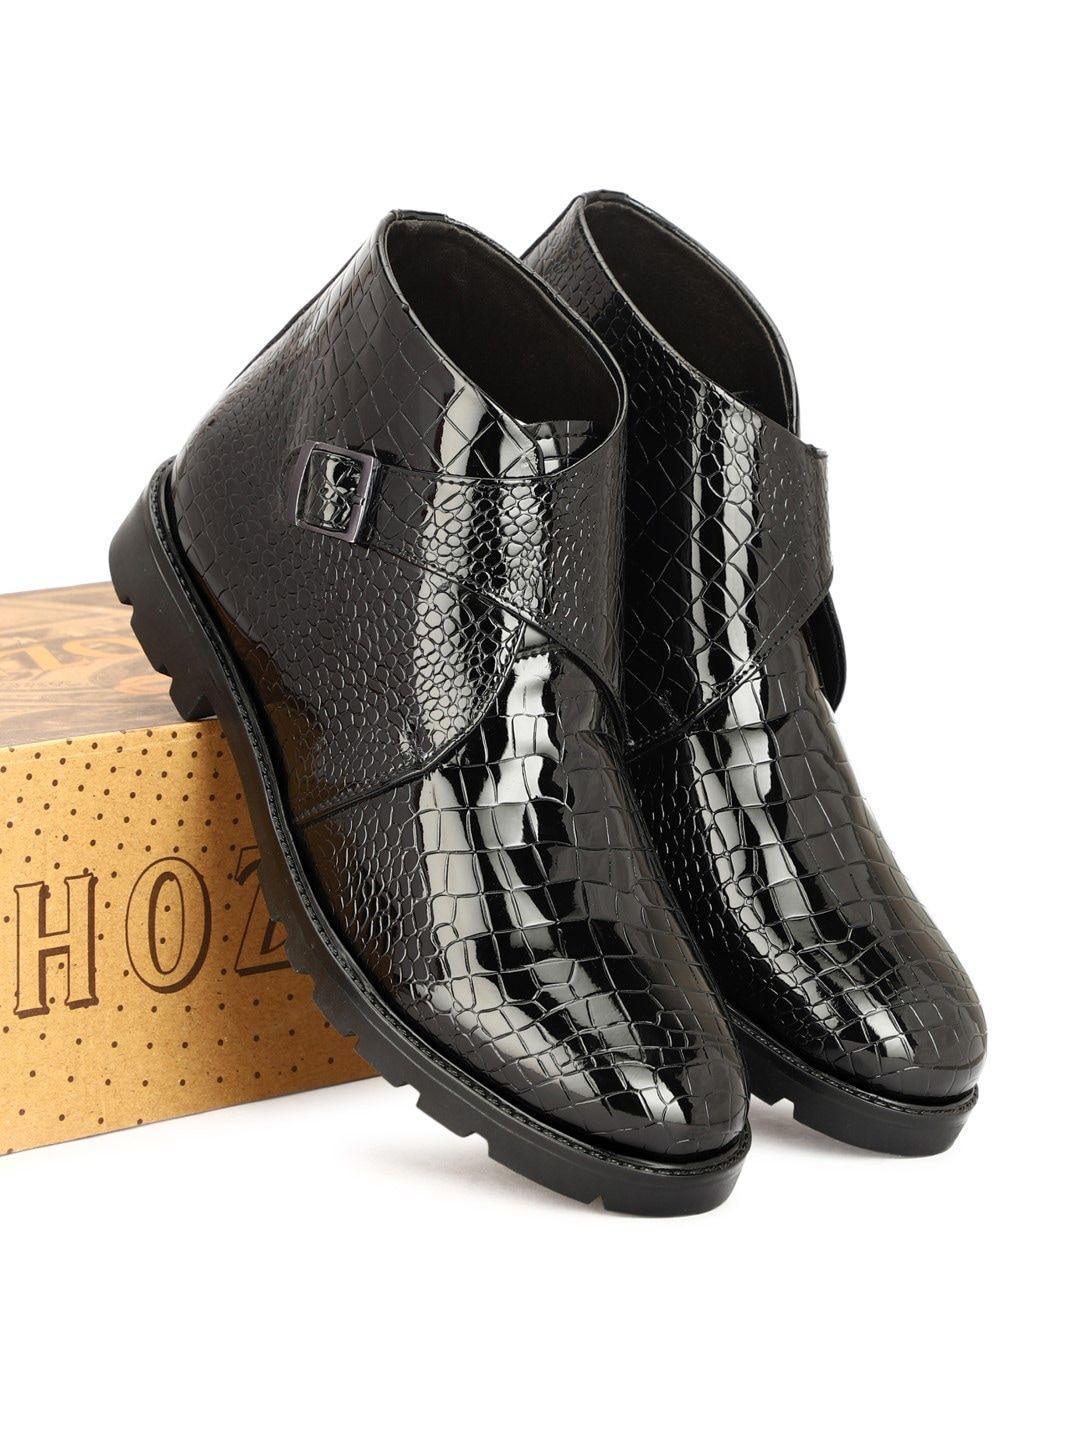 shozania men textured lightweight leather monk straps boots with buckle closure